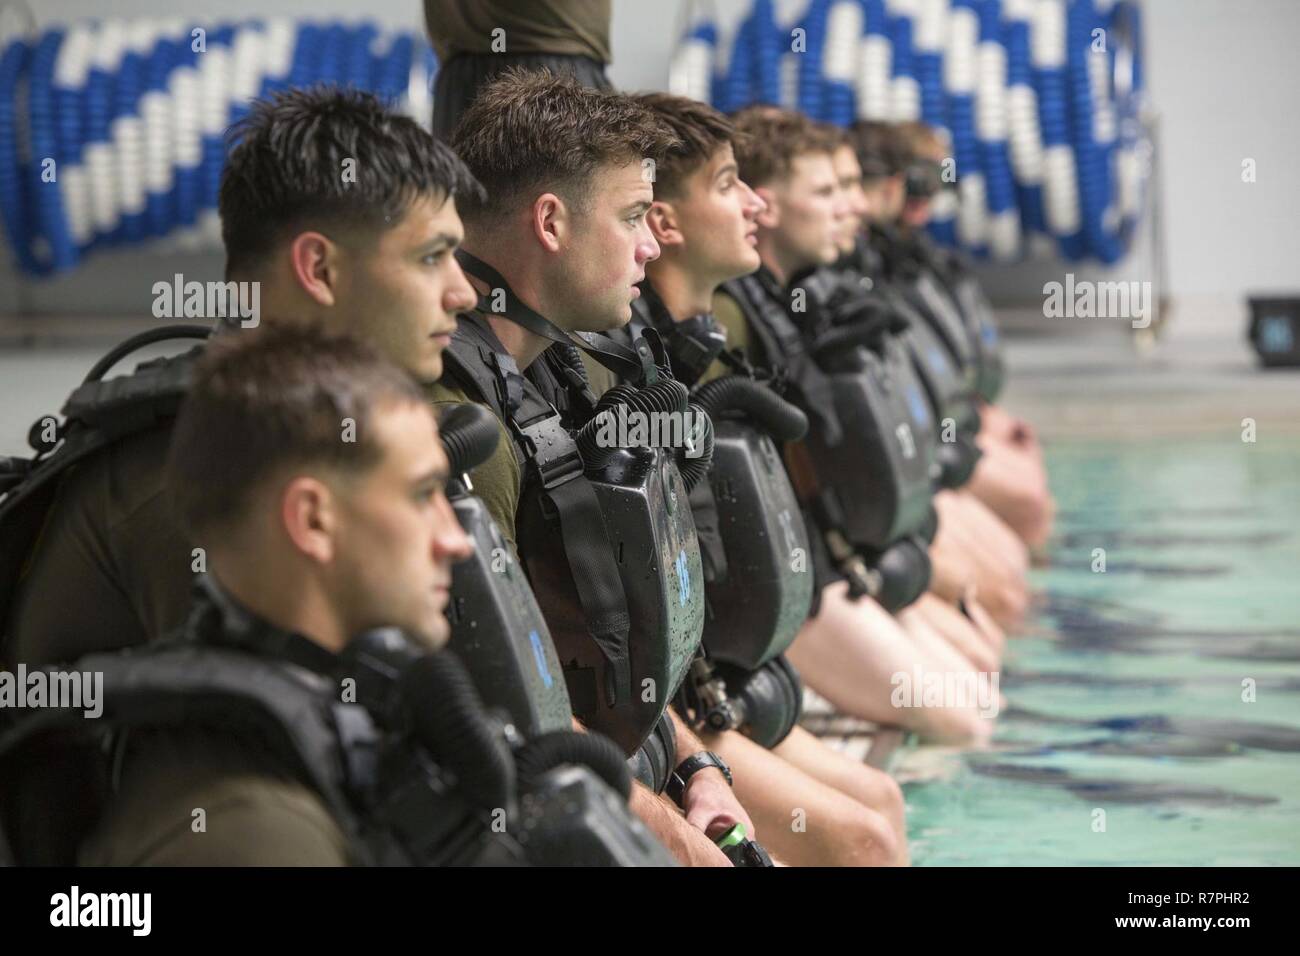 Marines await the command to enter the pool during a battalion training event at Camp Lejeune, N.C., March 23, 2017. The Marines conducted training with the MK-25 underwater breathing apparatus to maintain proficiency and confidence in their combat diving skills. The Marines are with 2nd Reconnaissance Battalion, 2nd Marine Division. Stock Photo